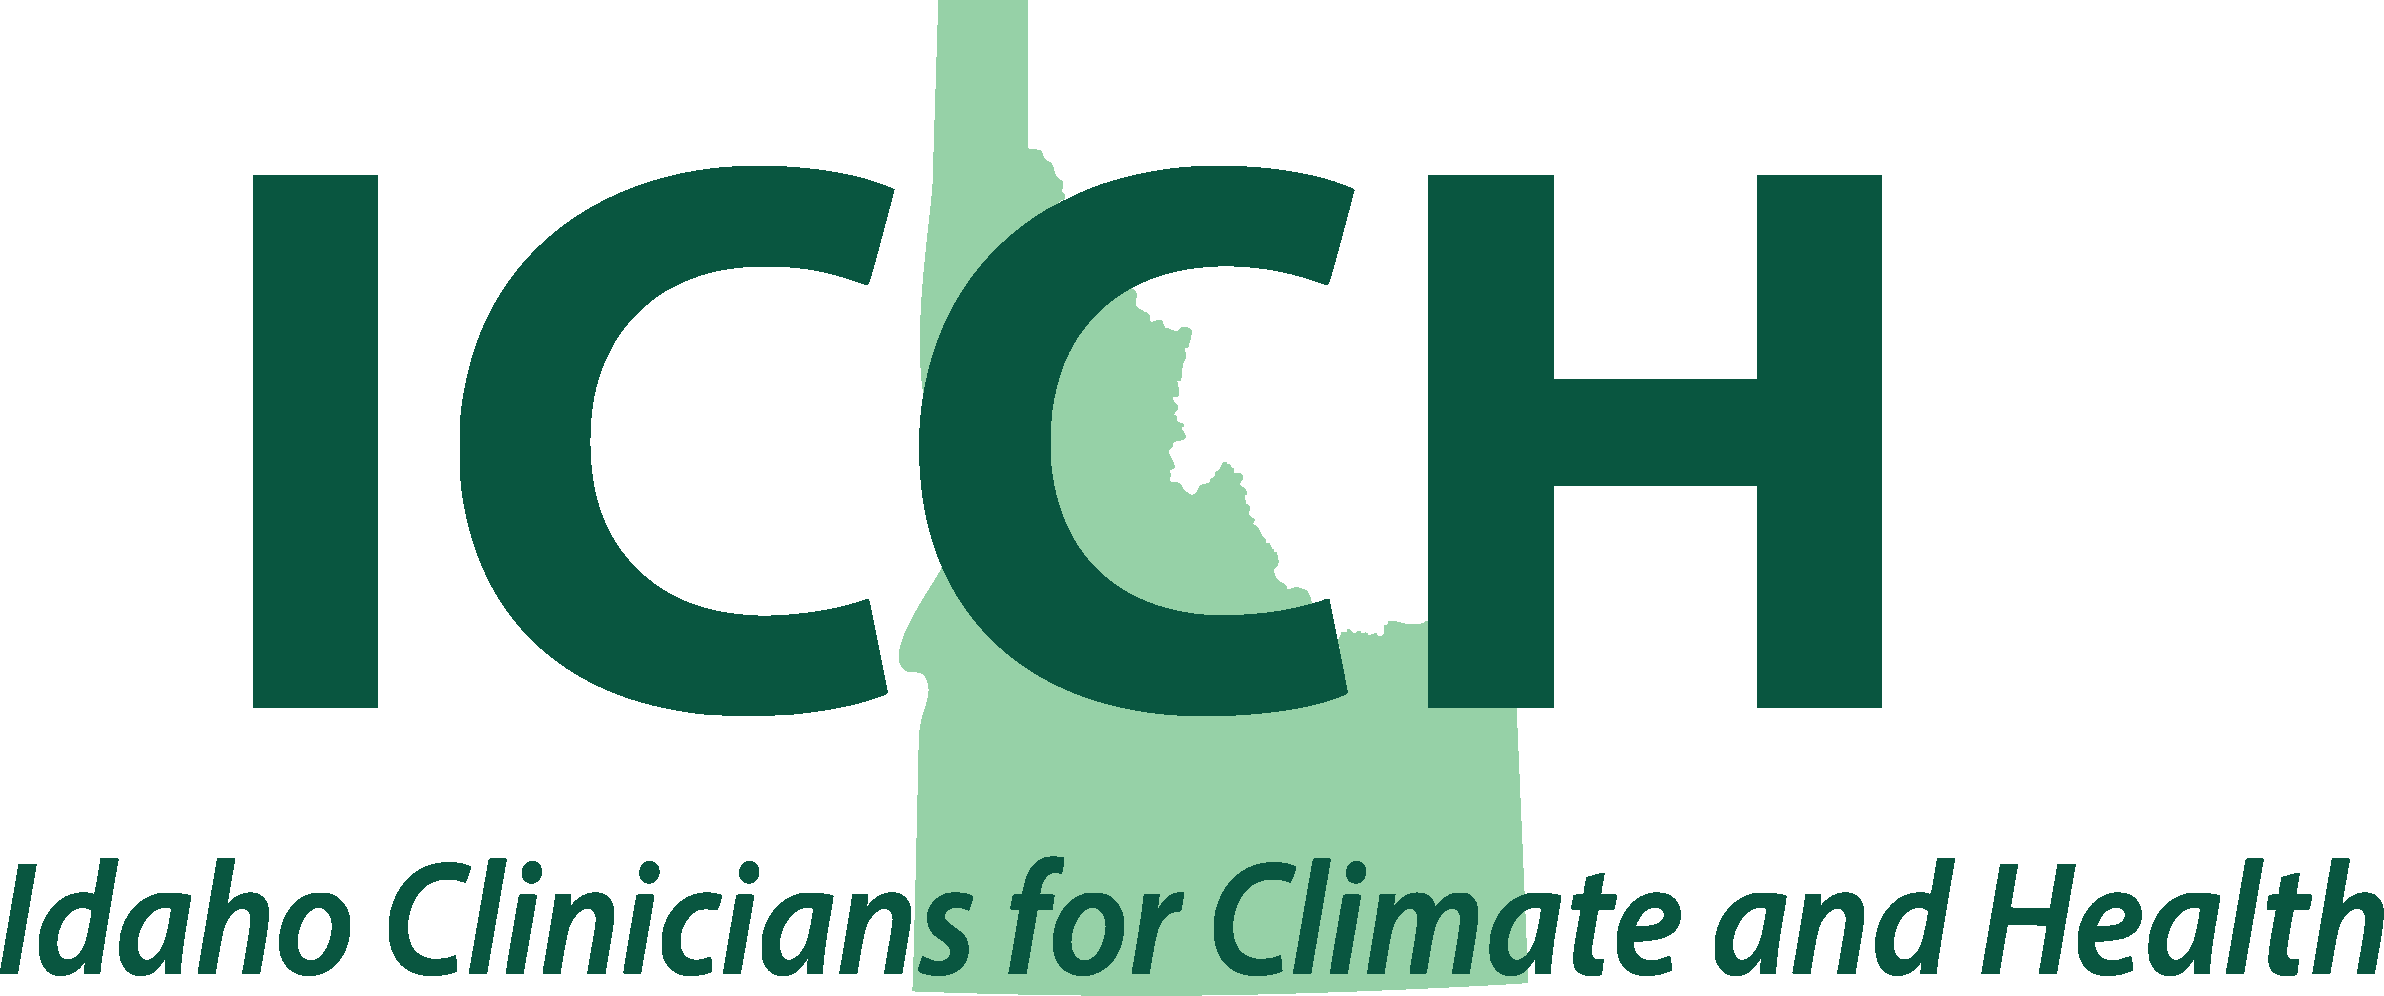 Idaho Clinicians for Climate and Health